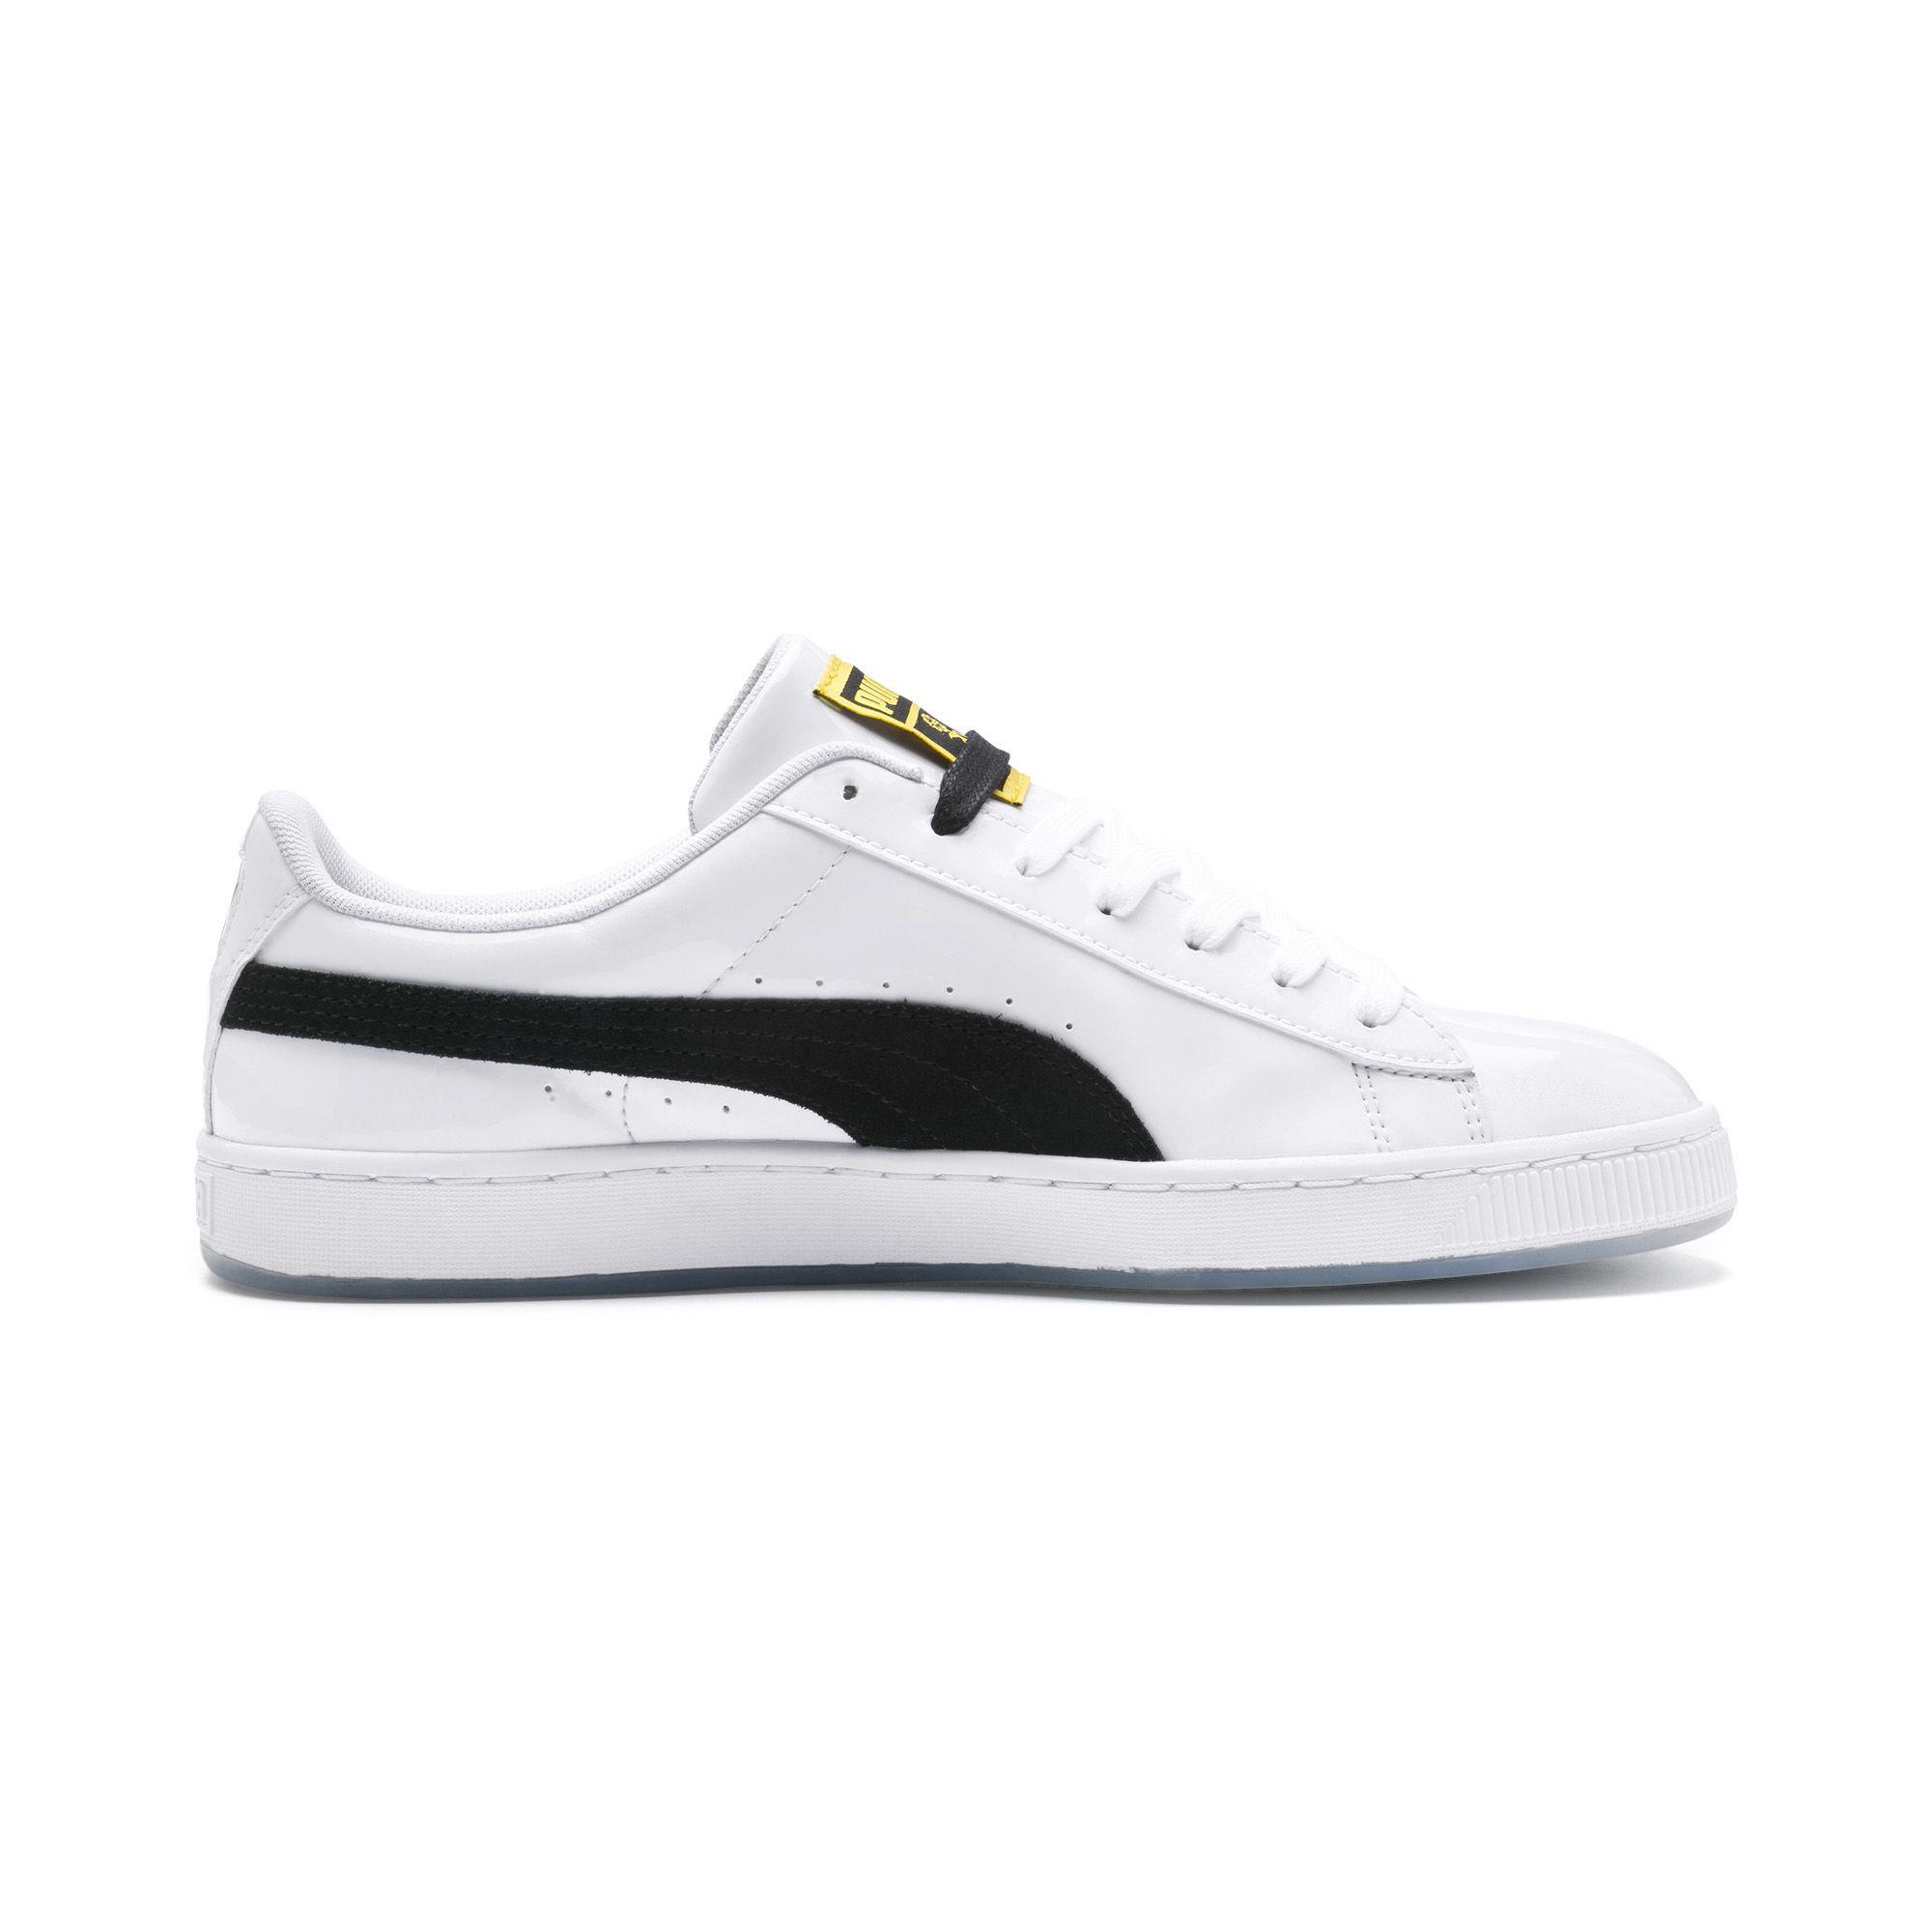 PUMA Rubber X Bts Basket Patent Sneakers in White for Men - Lyst